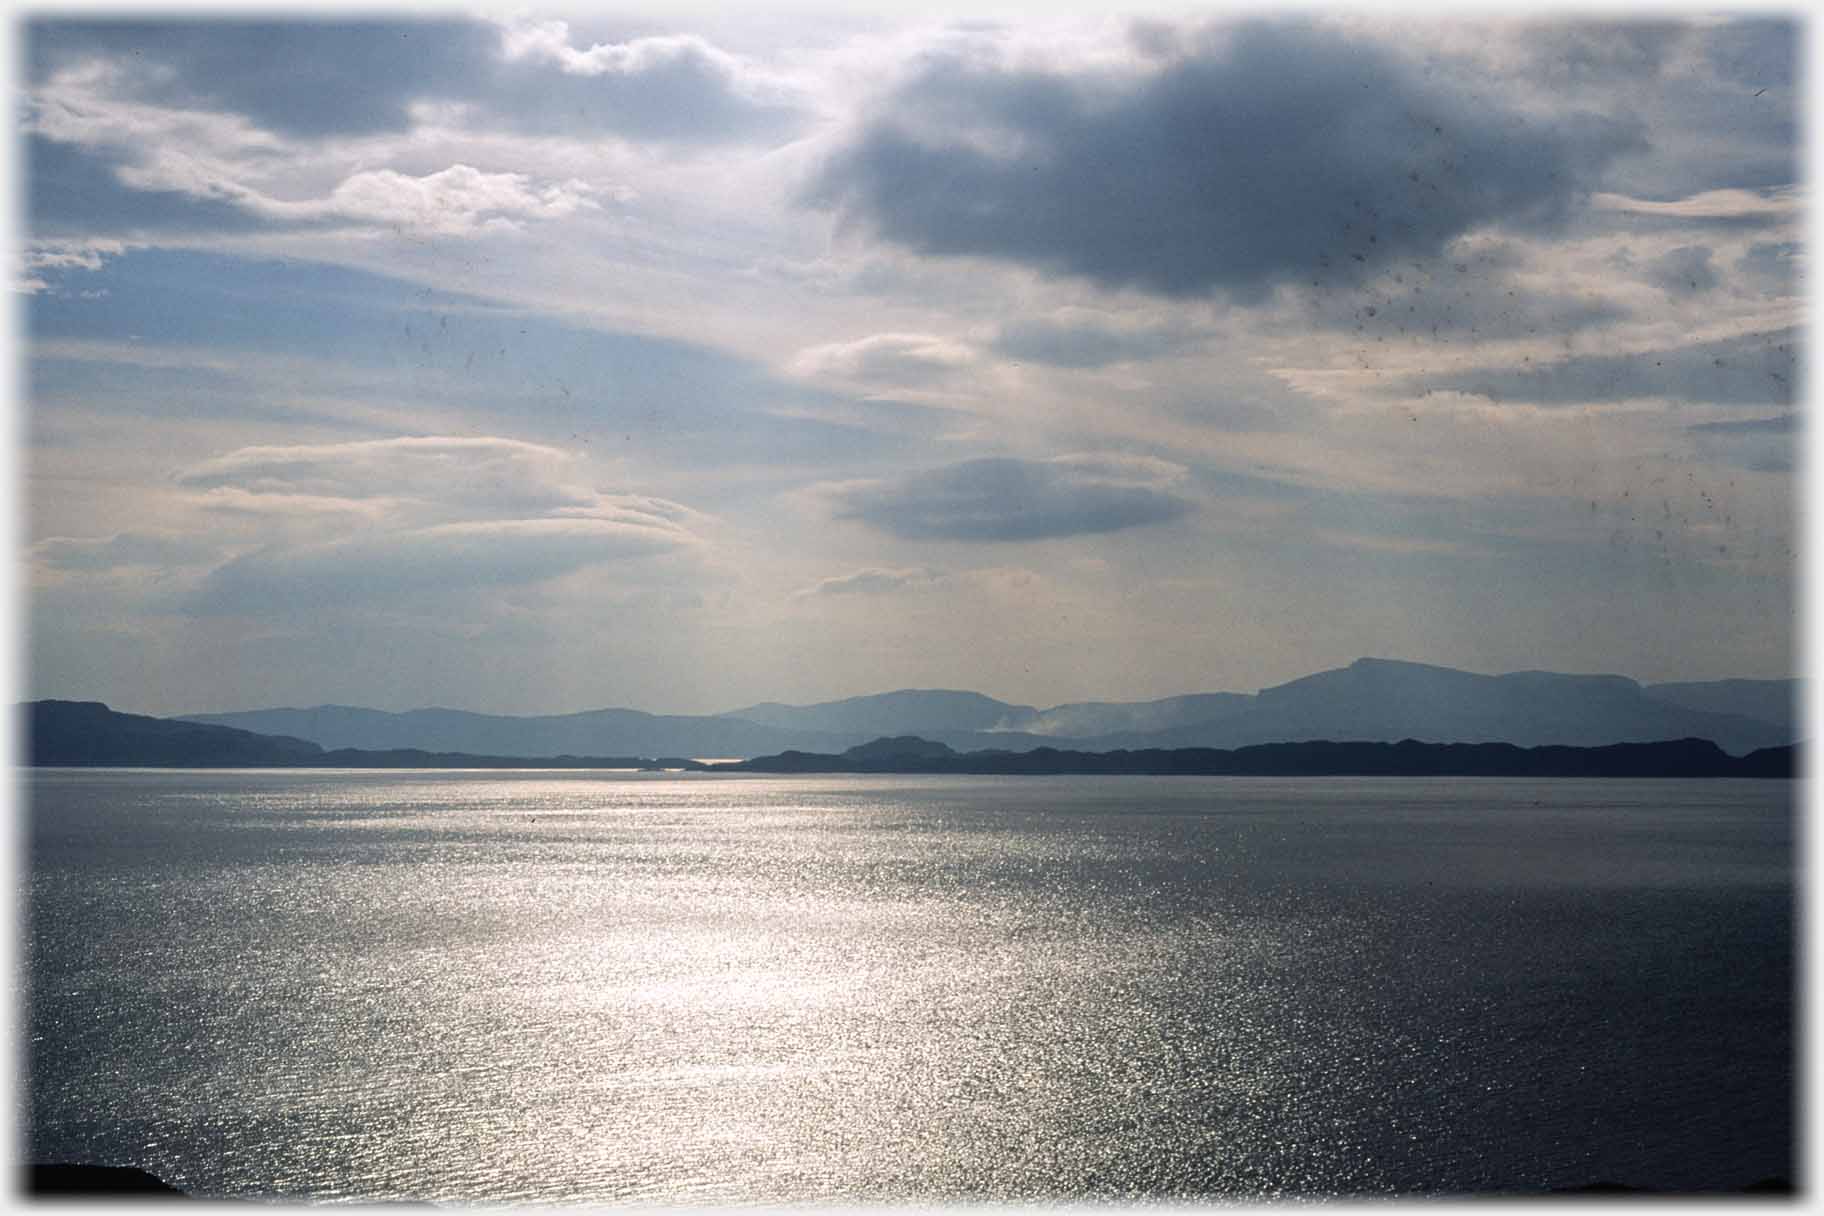 Light glinting on the sea with hills beyond.